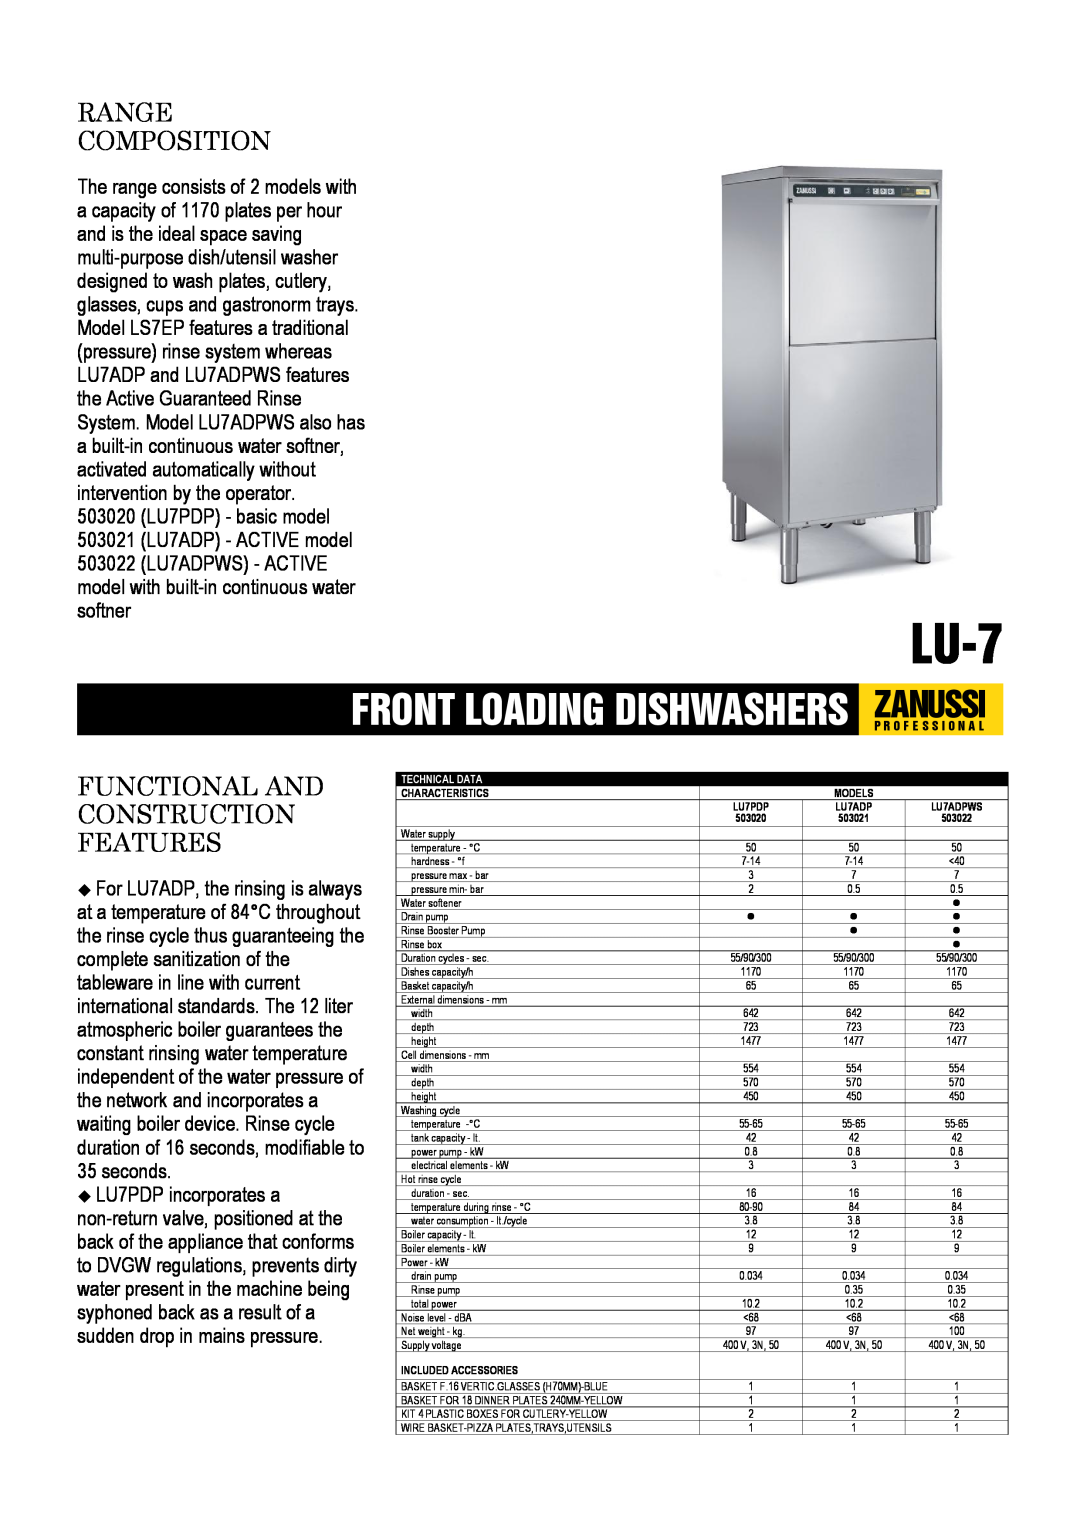 Zanussi LS7EP, LU7PDP, LU7ADPWS, 503021, 503020 dimensions LU-7, Range Composition, Functional And Construction Features 